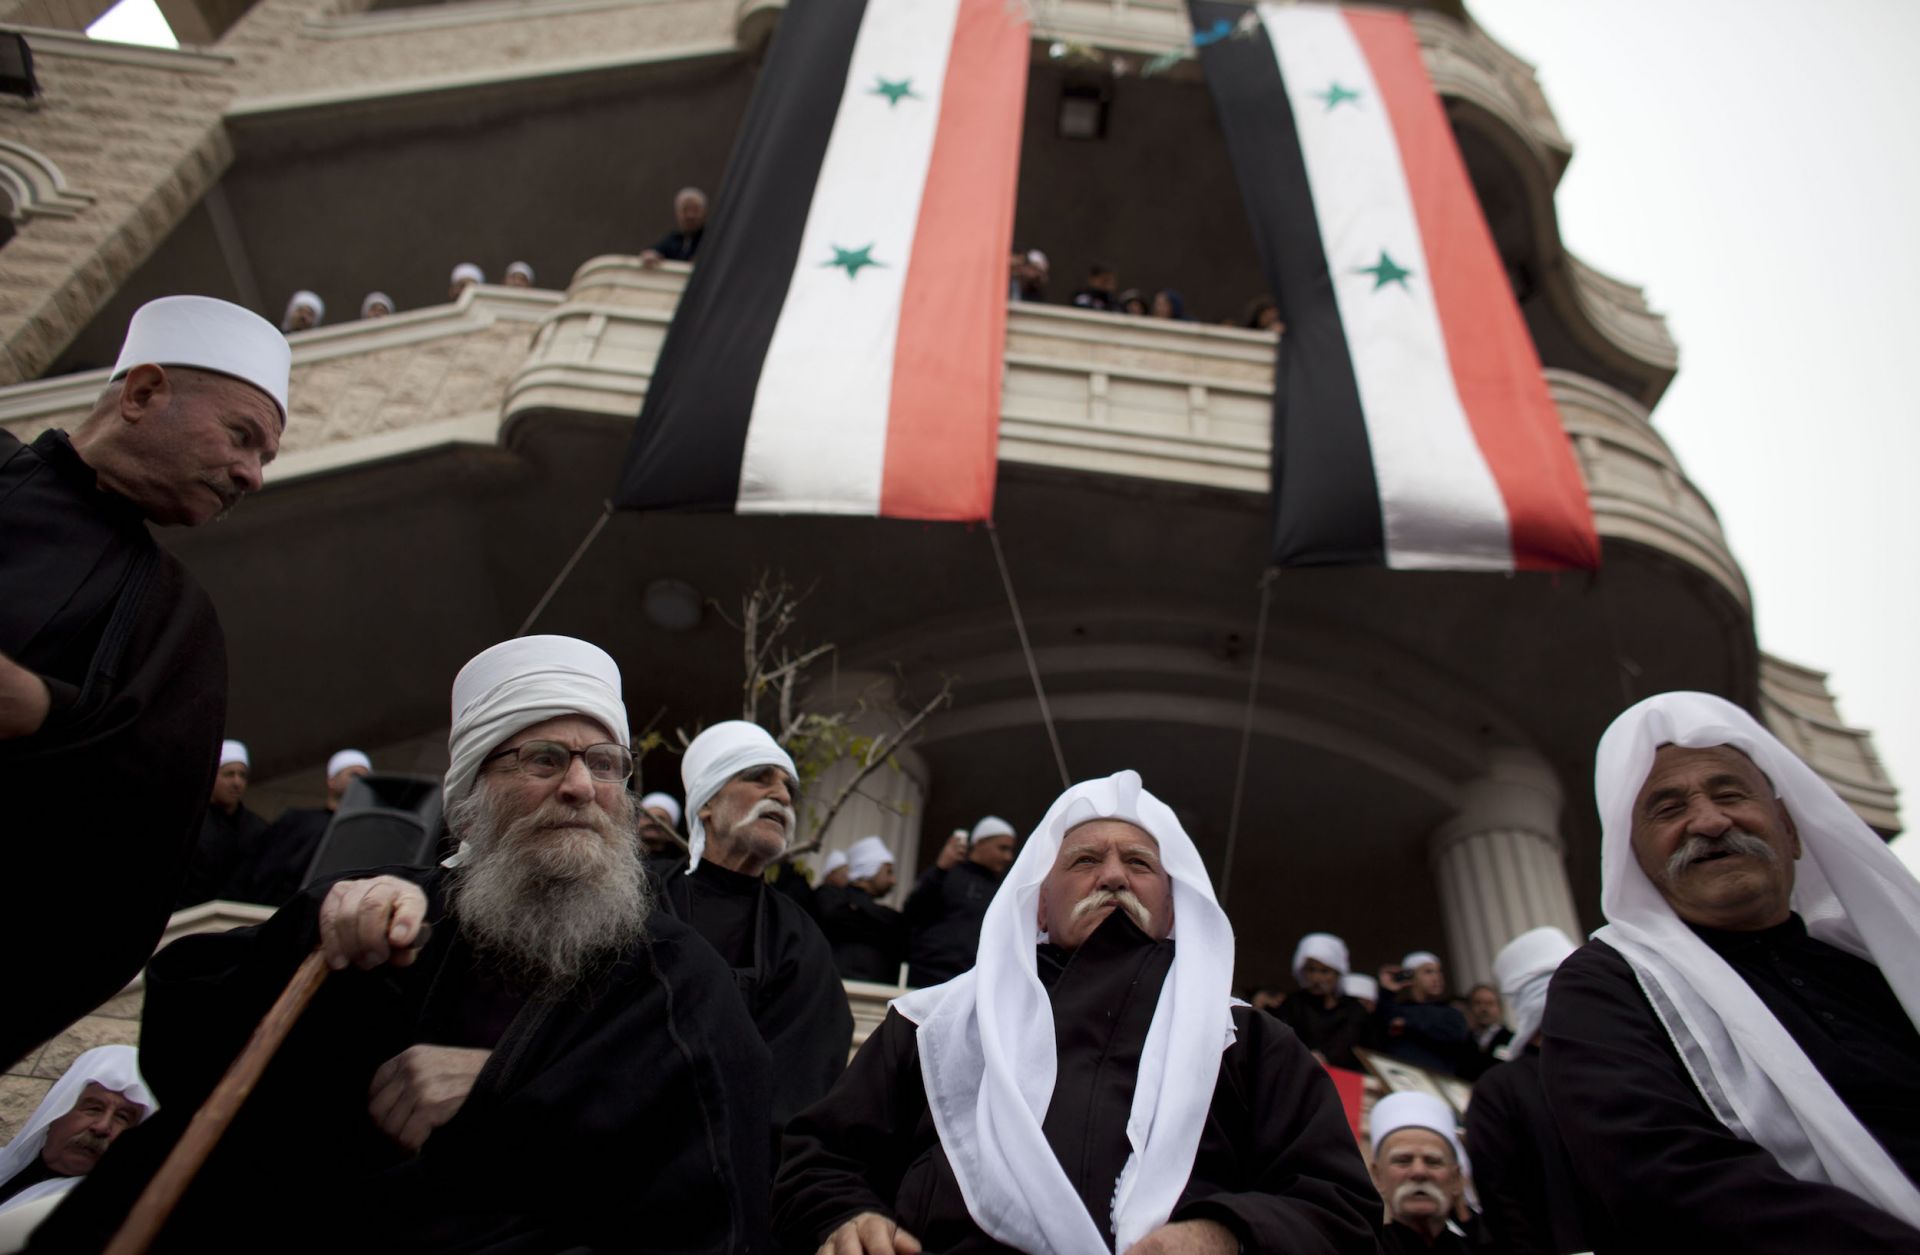 Druze men rally in support of the Syrian government in February 2012 in Majdal Shams, a Druze town on the Israeli-controlled side of the Golan Heights.